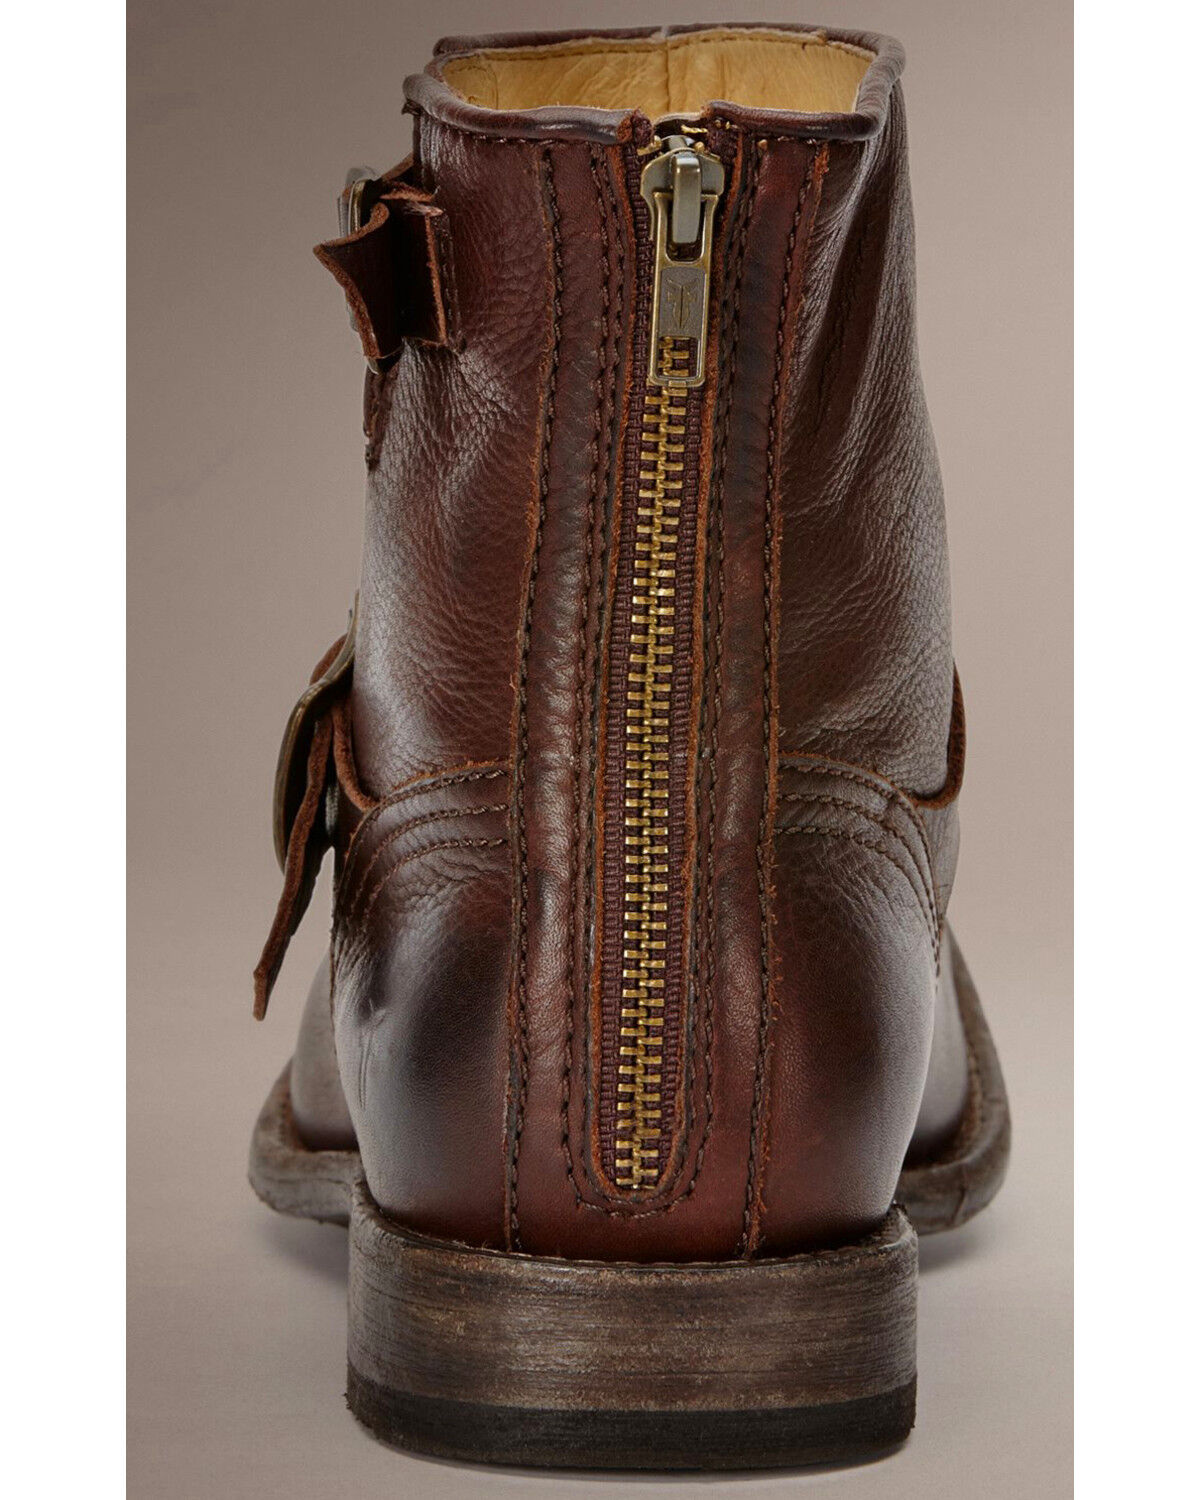 frye boots with zipper